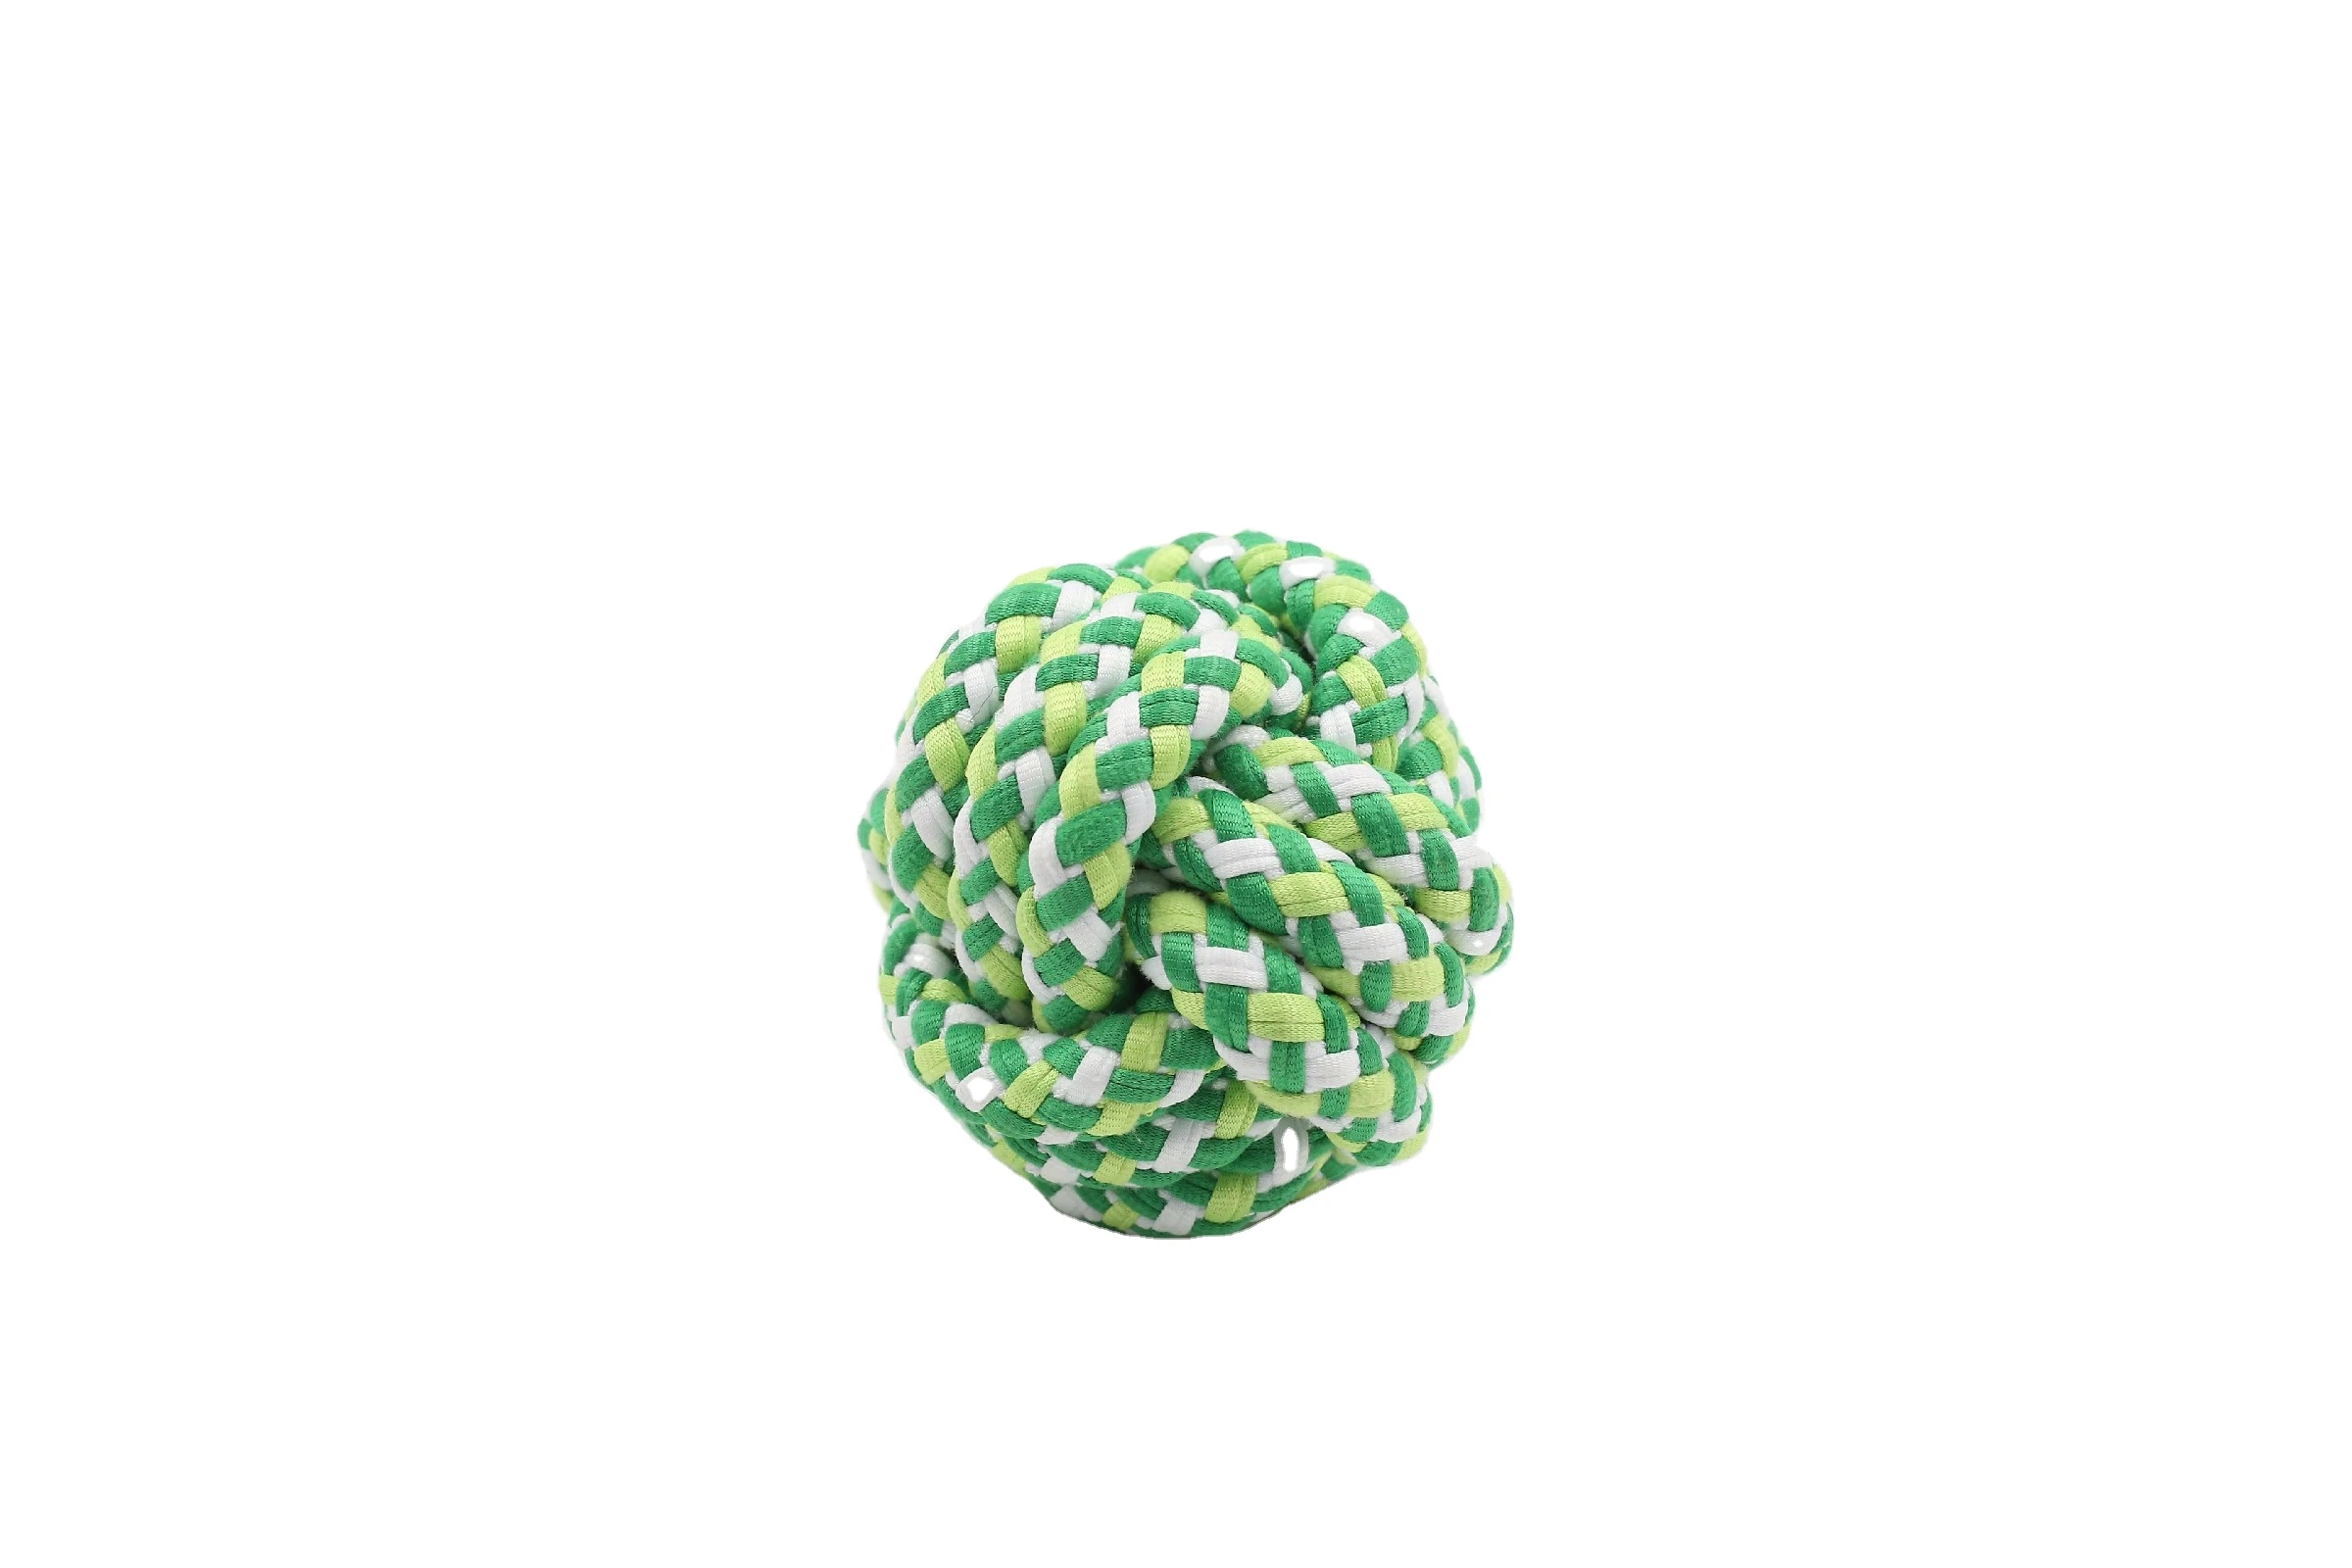 Interactive dog throw ball activity toy green rope ball for dog teeth cleaning